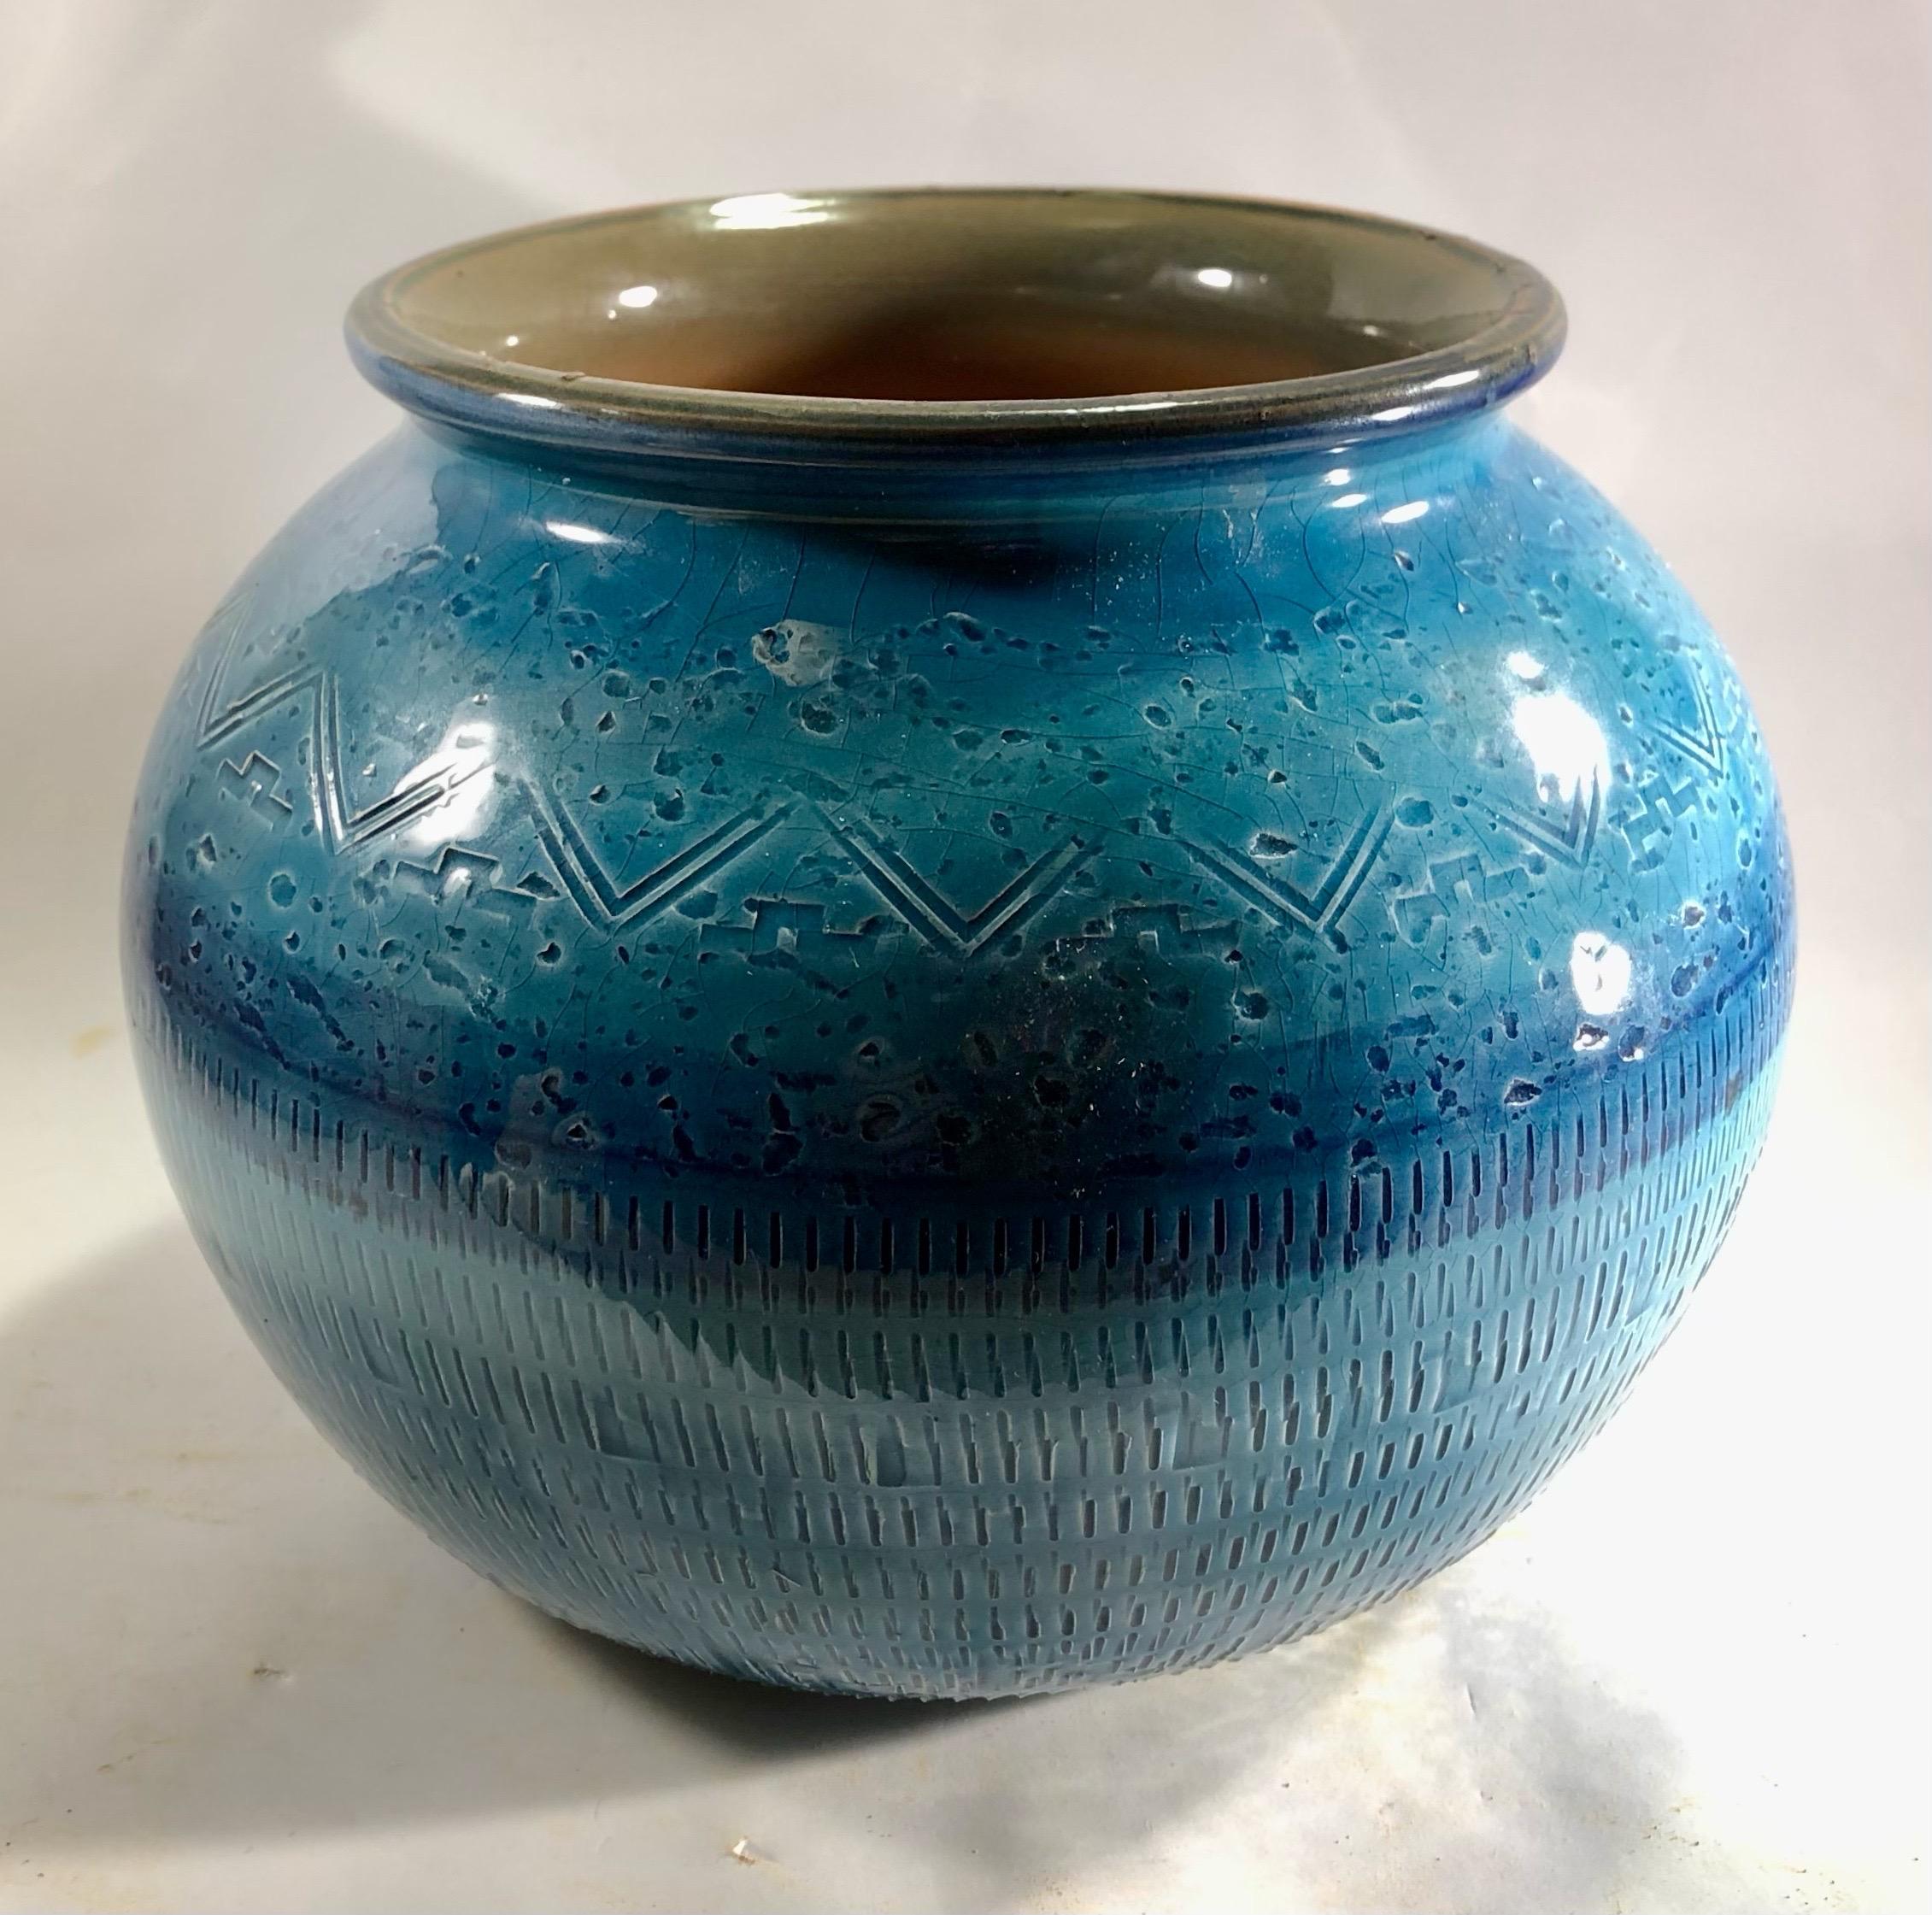 'Rimini blu' glazed ceramic vase designed by Aldo Londi for by Bitossi. Italy, 1960s. This eye-catching vase is made of blue glazed ceramic with engraved patterns surrounding the central part. Its gorgeous shades of blue and the geometric design of